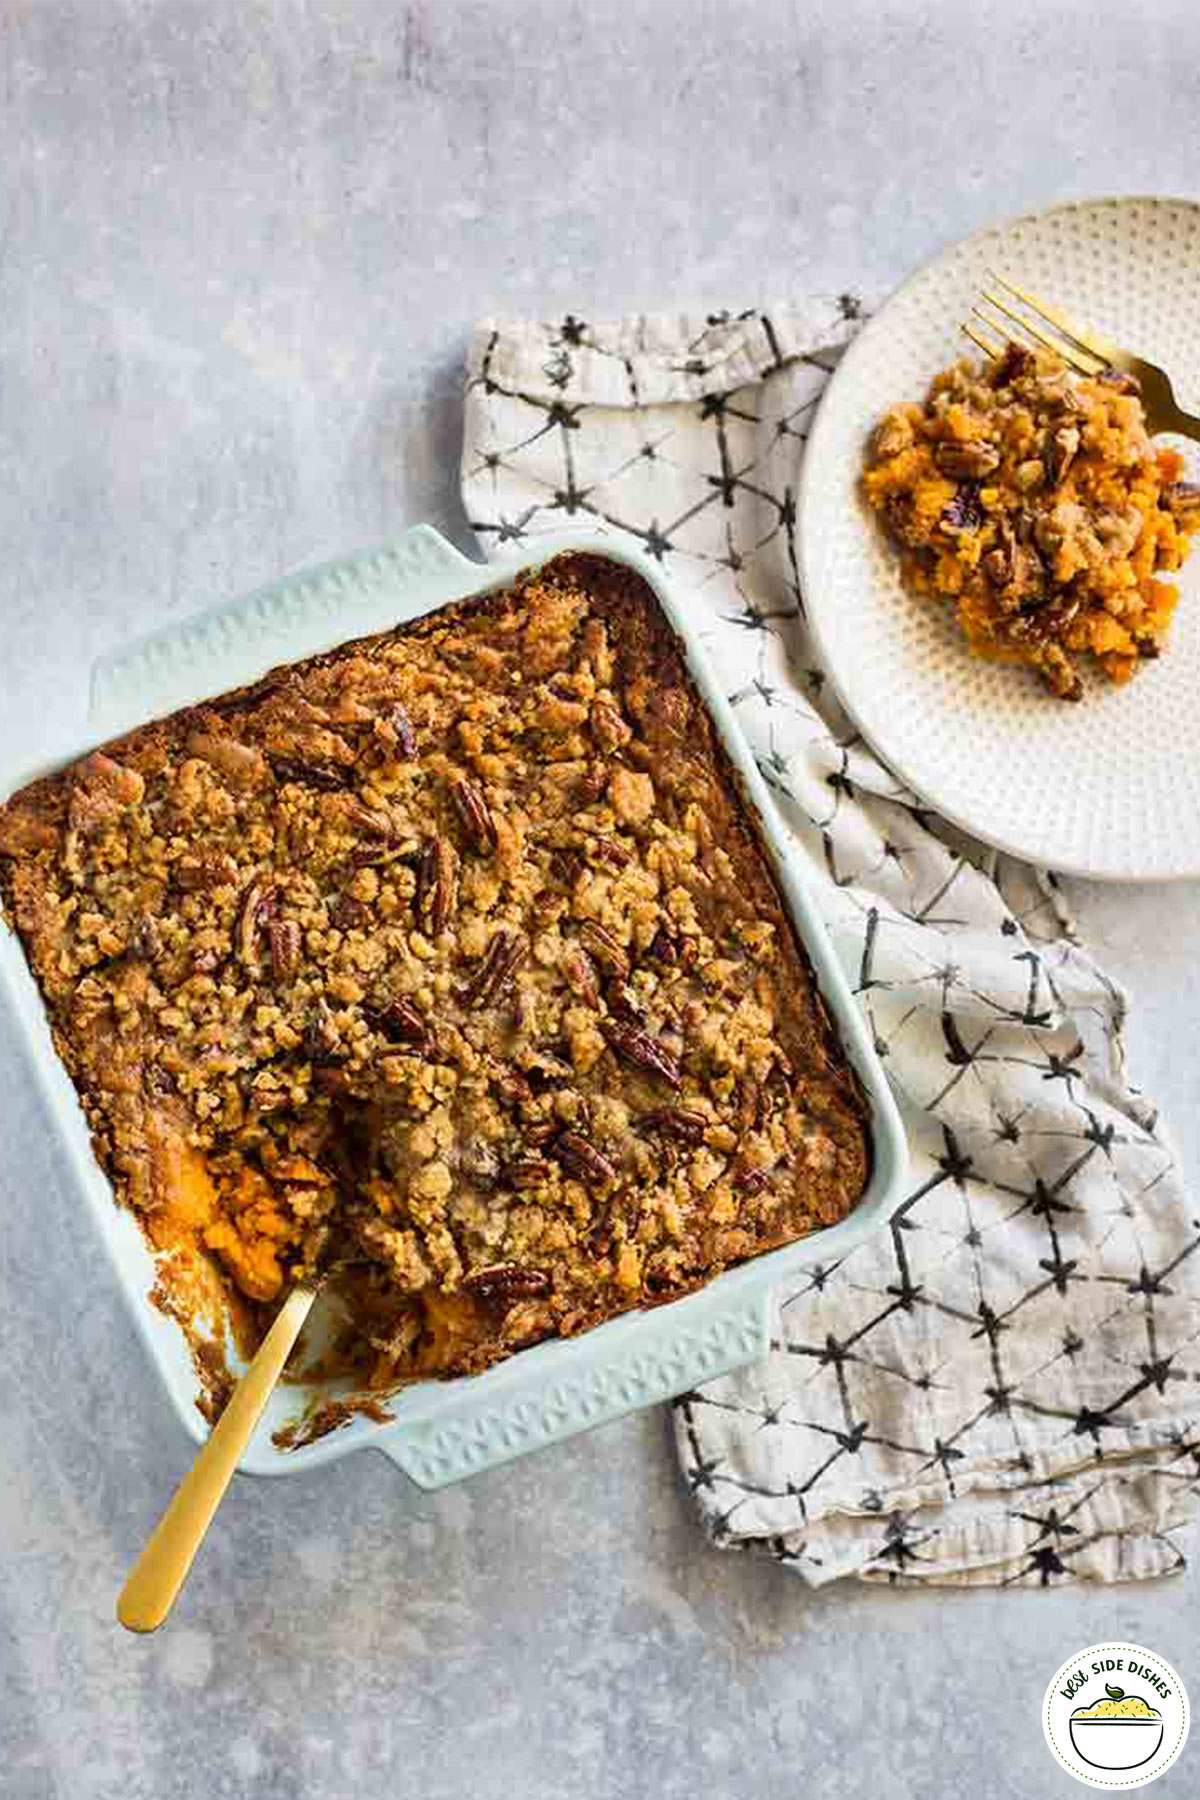 Sweet potato casserole in a dish next to a plate with a serving